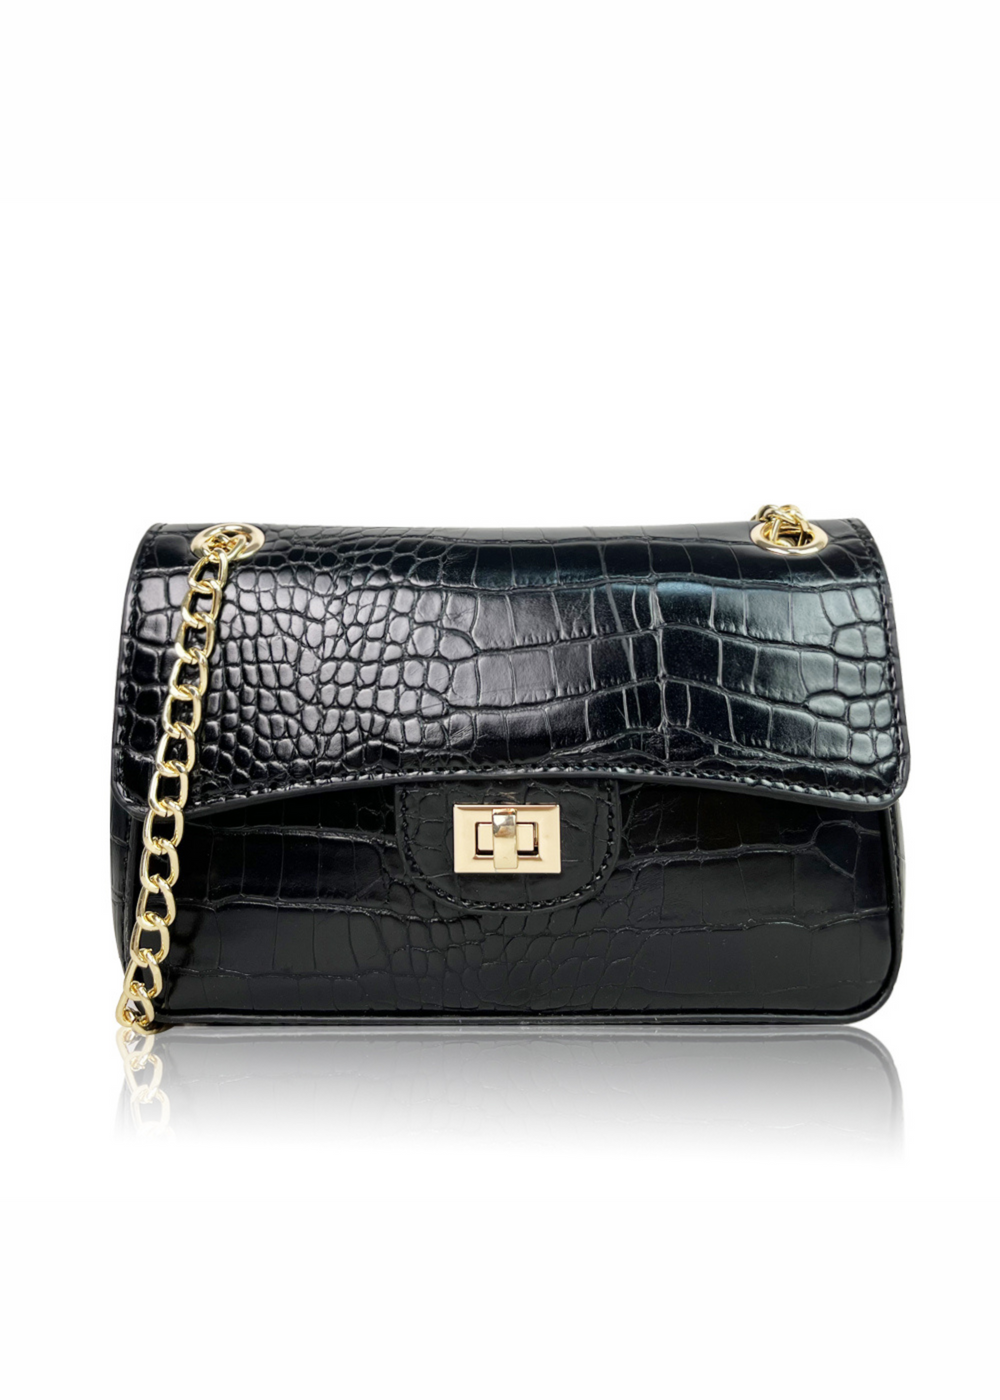 CALYPSO SHOULDER BAG WITH CHAIN AND BUCKLE DETAIL IN BLACK CROC